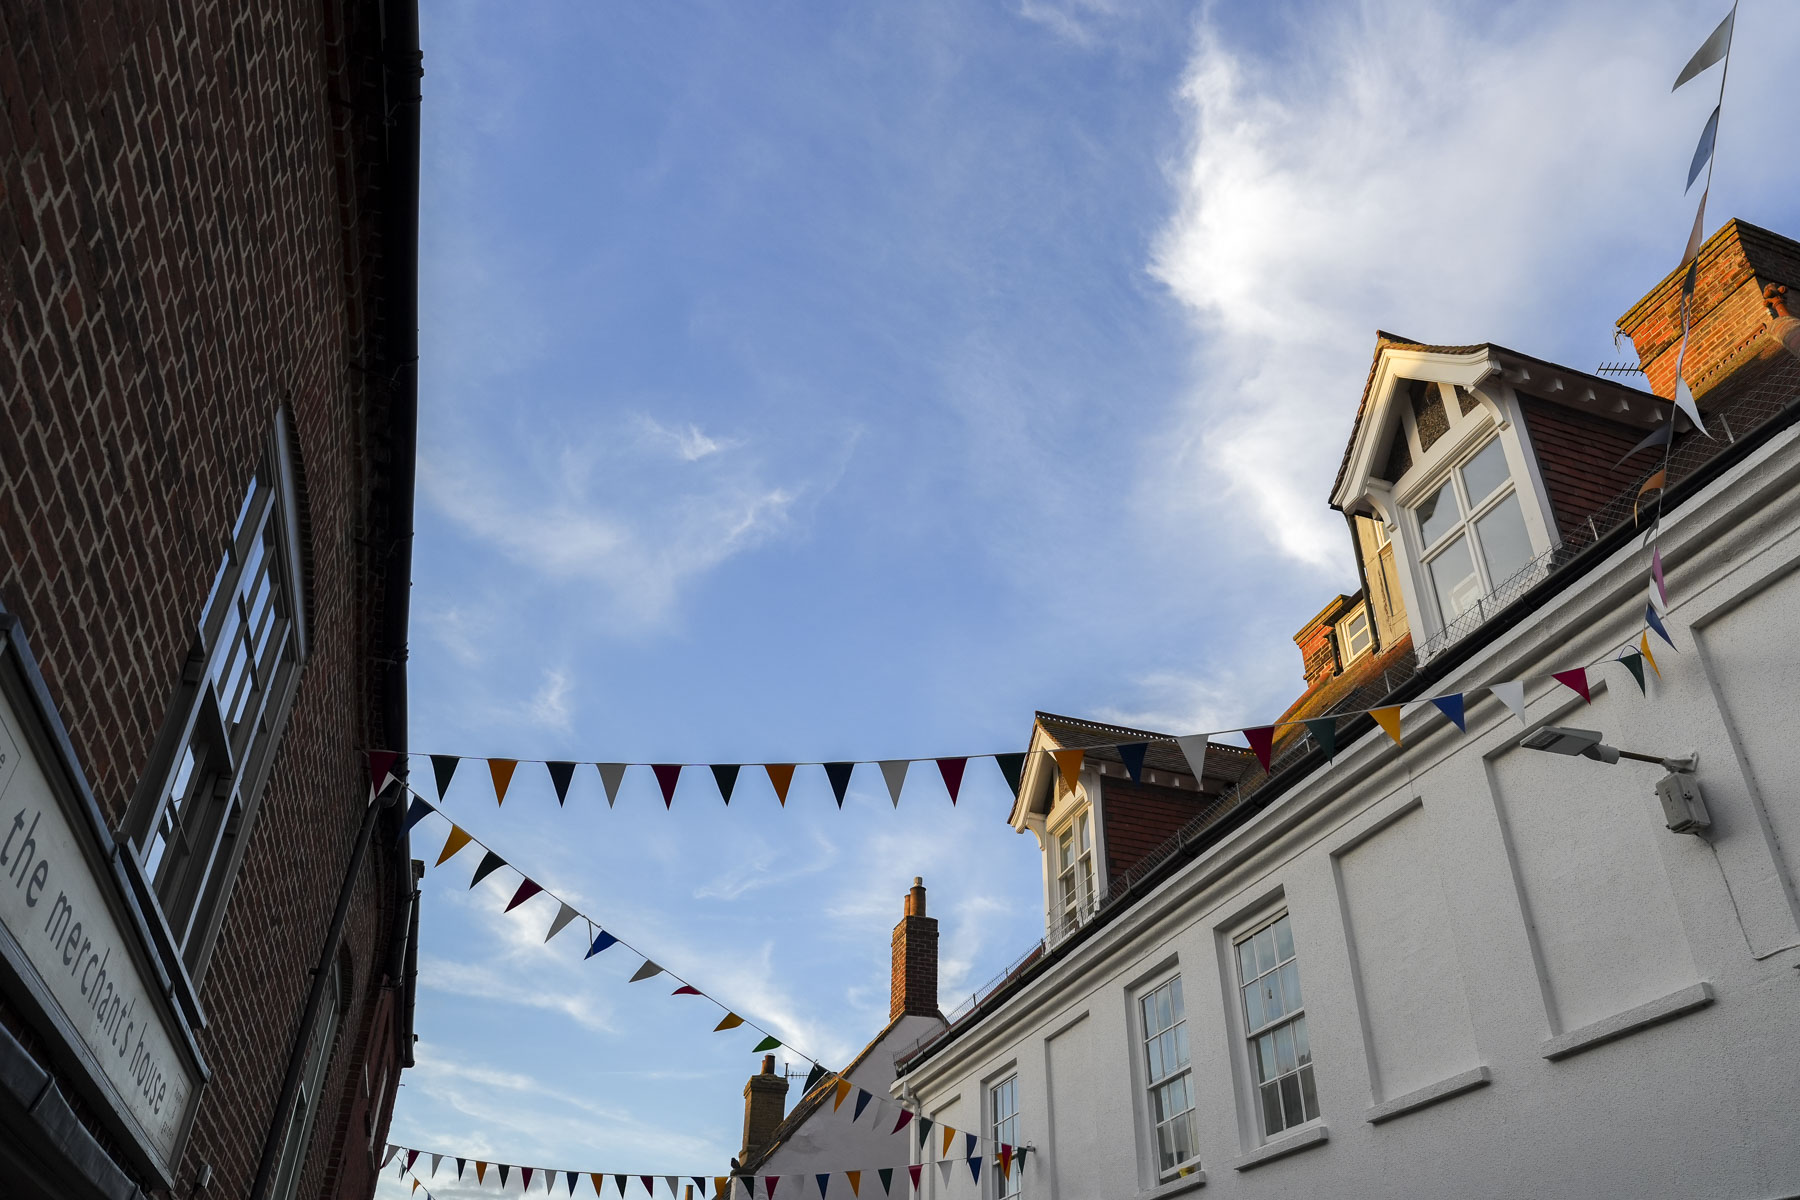 Bunting across old buildings at golden hour captured with the Sony A7C II full-frame mirrorless camera